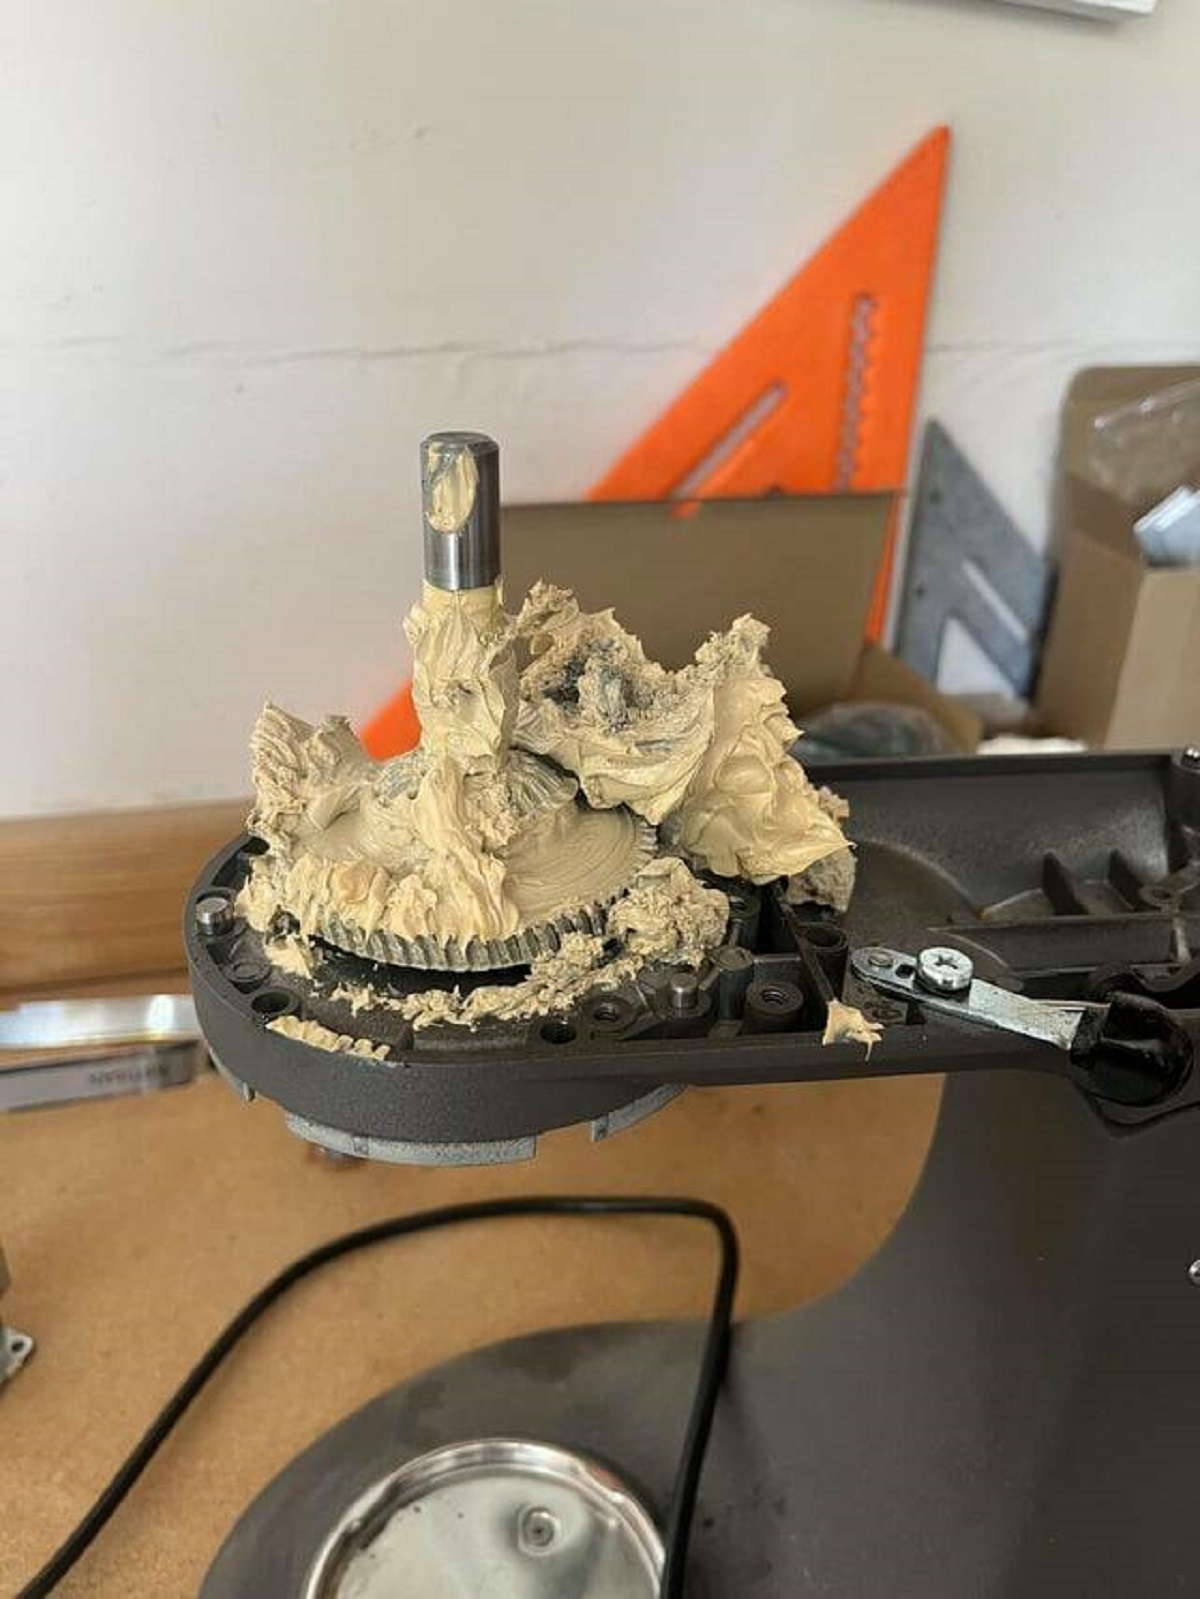 "The inside of a KitchenAid is filled with grease"